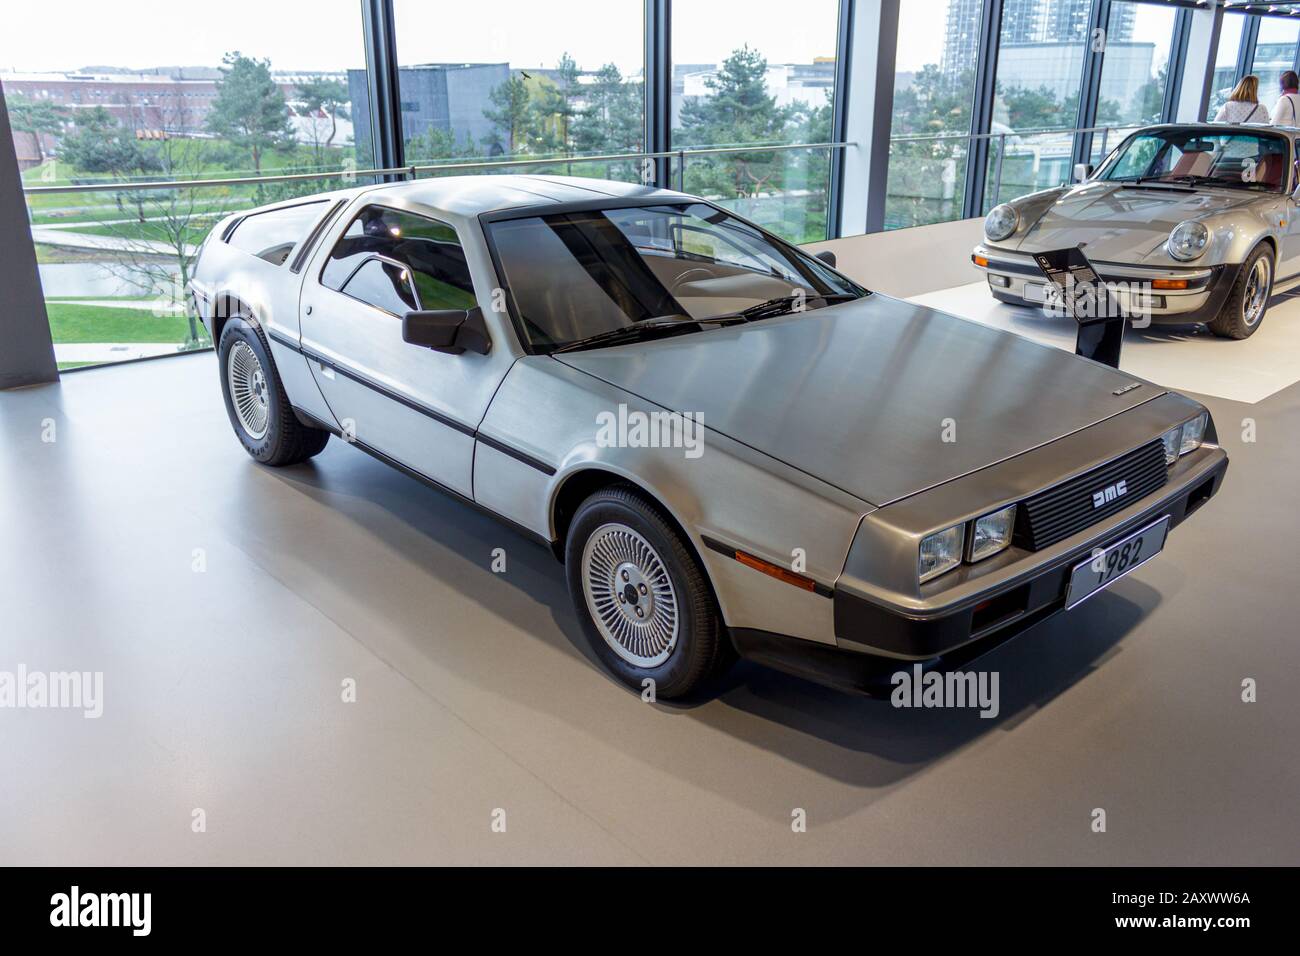 WOLFSBURG, GERMANY - March 29, 2015. Delorean car from 1982 on display at Autostadt museum in Wolfsburg. The car from the movie back to the future. Stock Photo